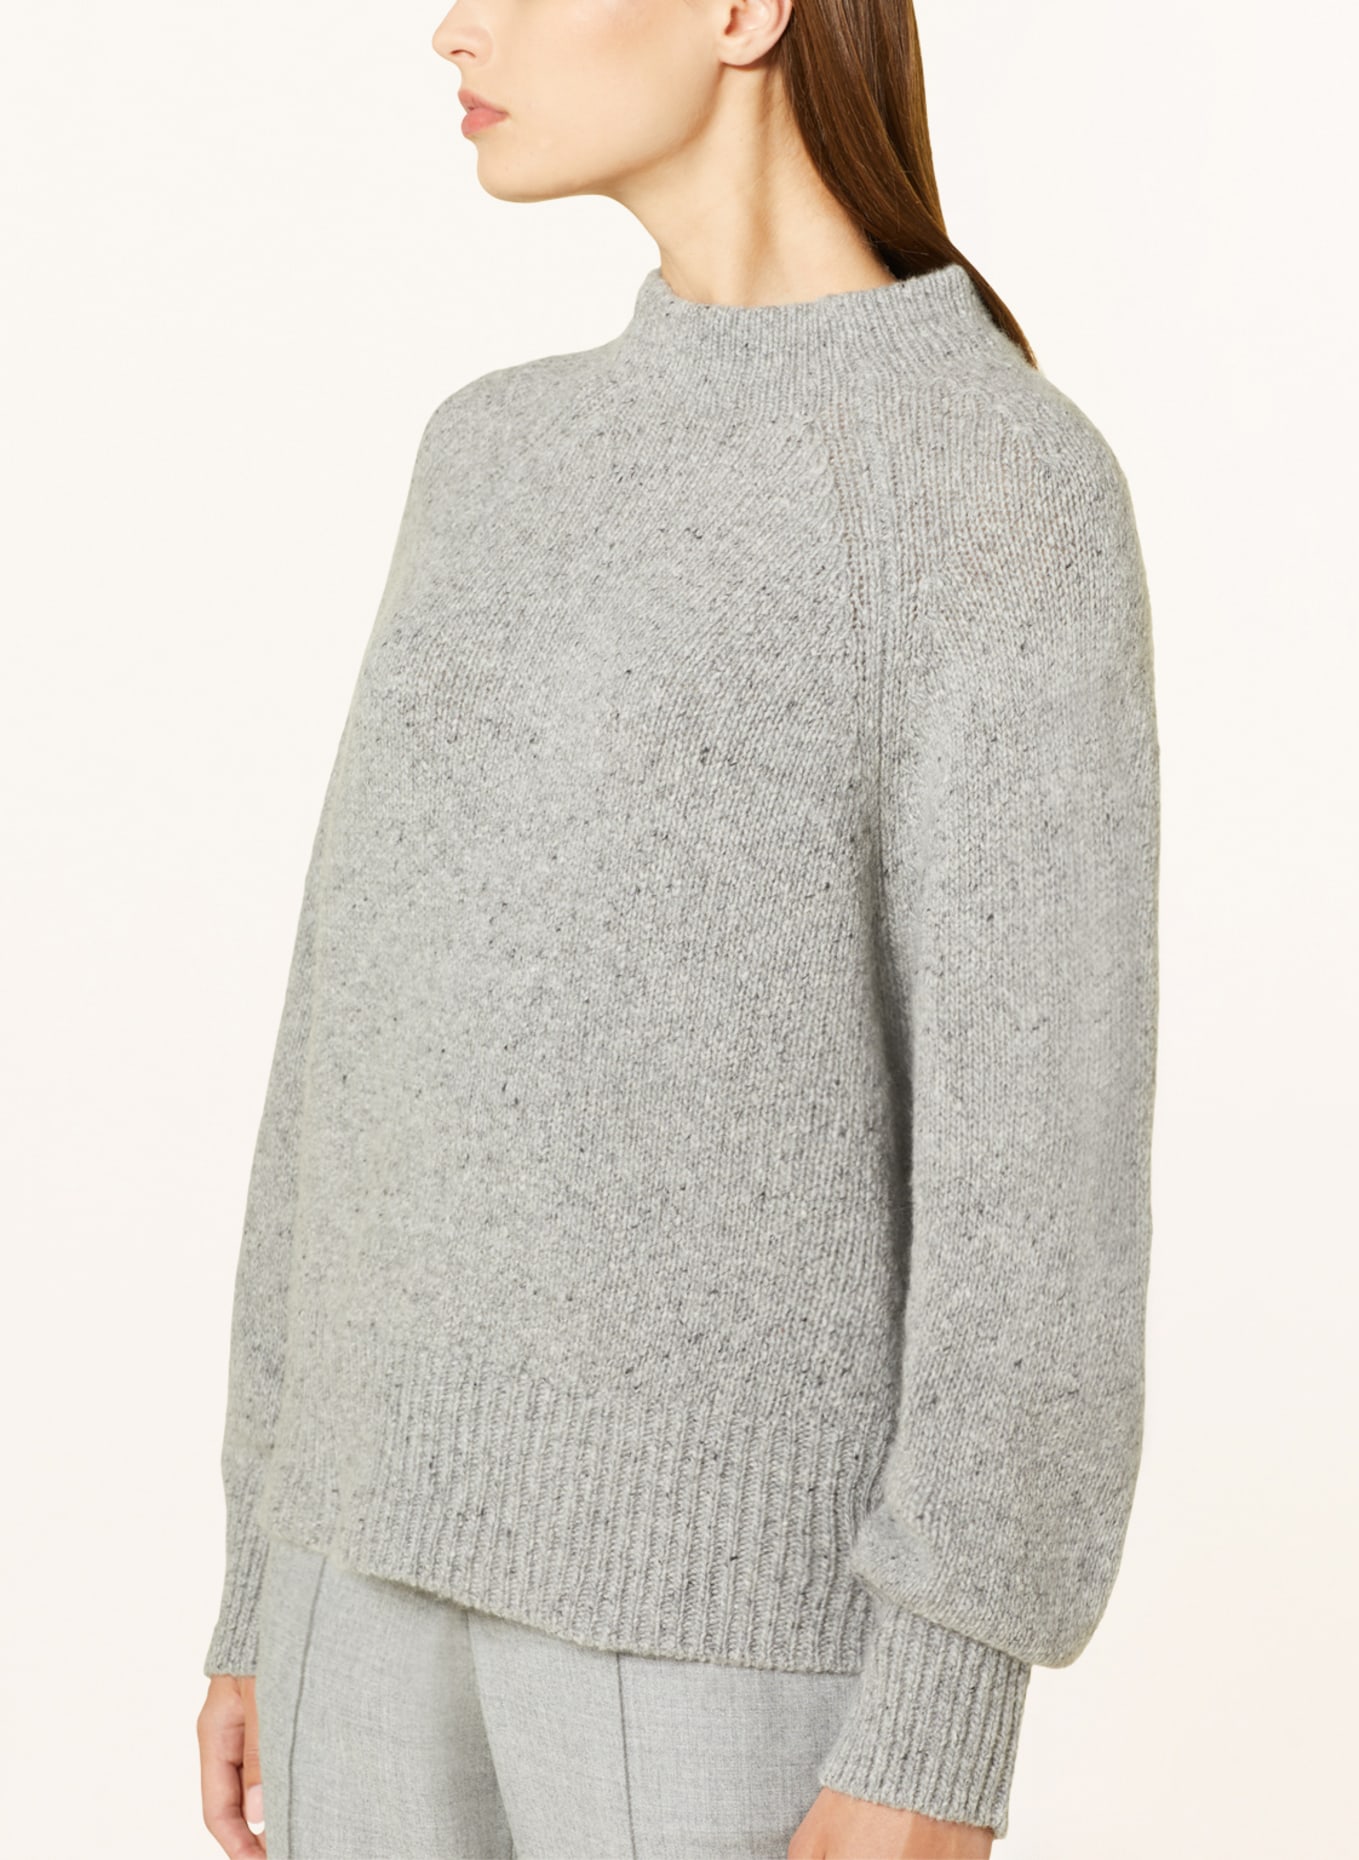 windsor. Cashmere sweater, Color: GRAY (Image 4)